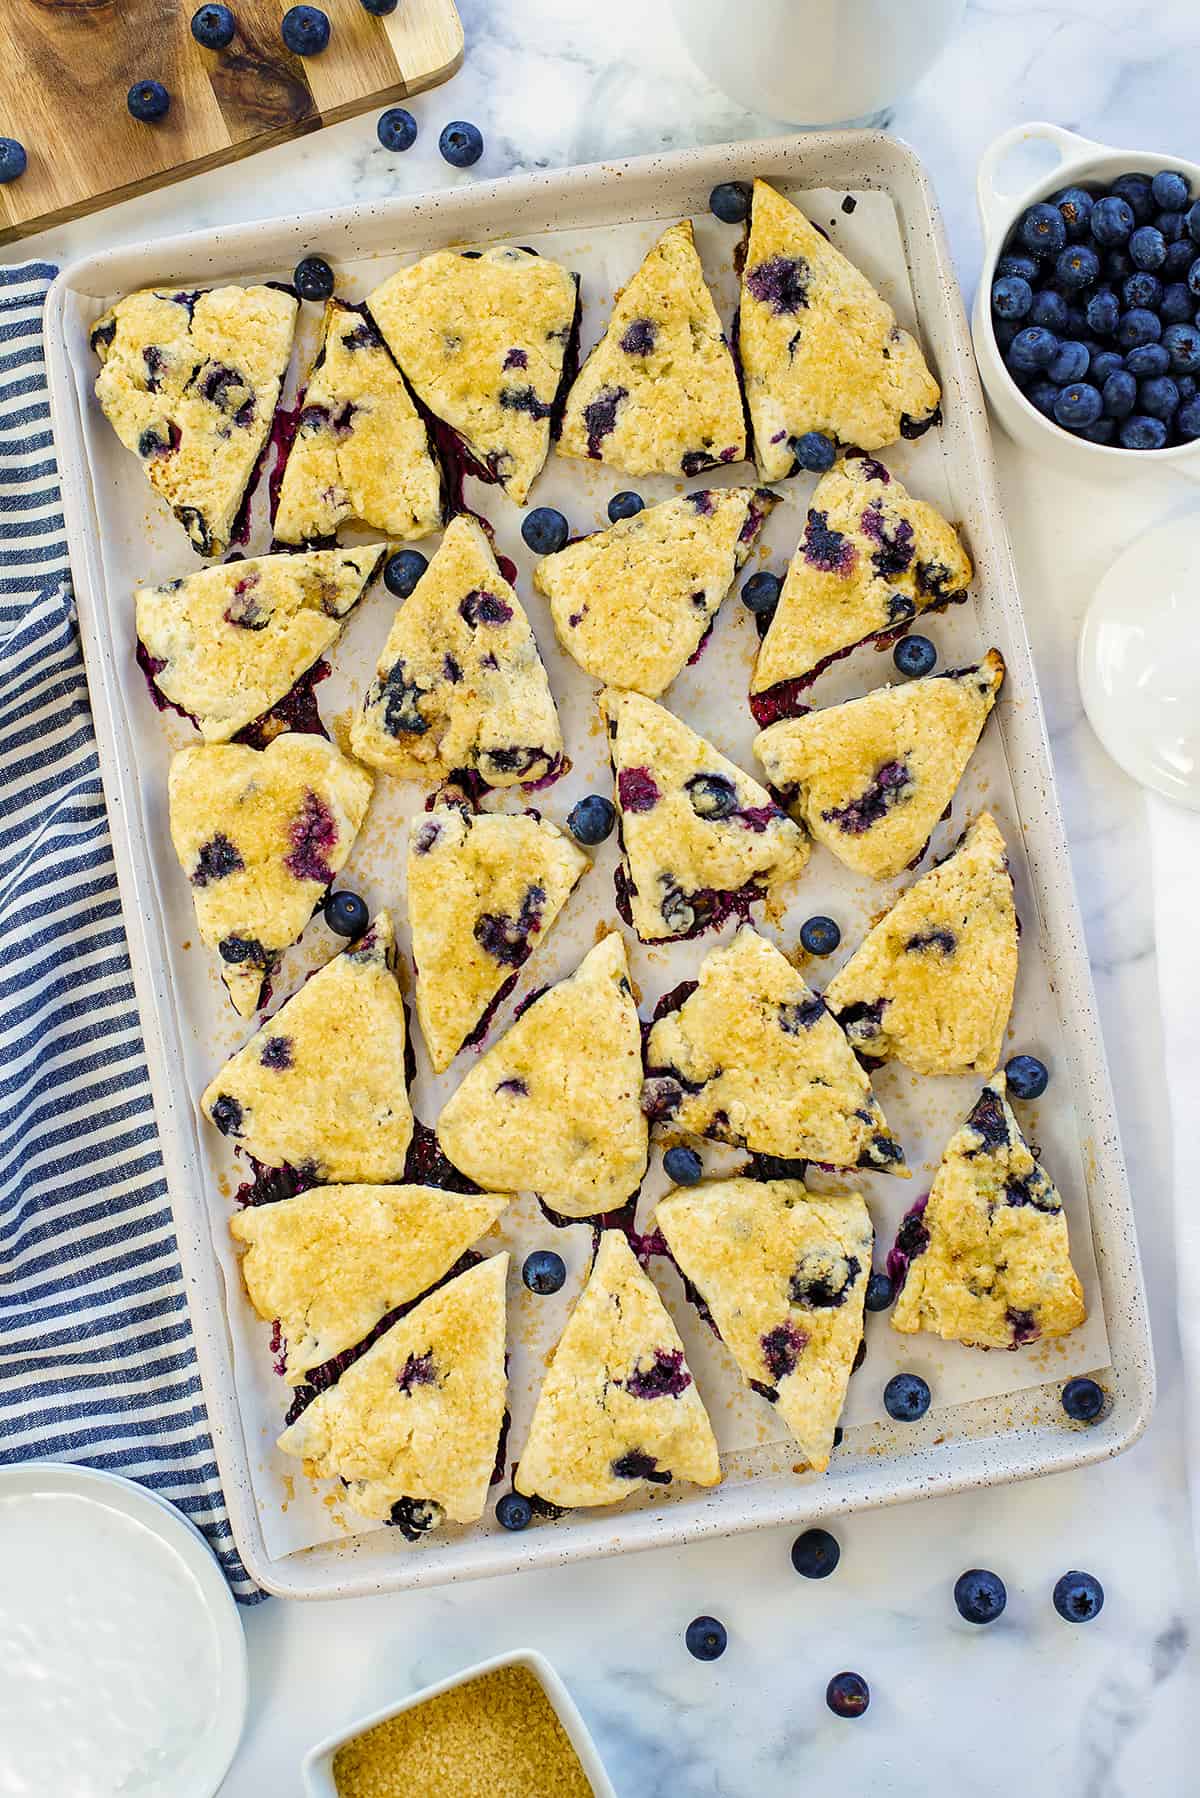 Baked scones studded with fresh blueberries on baking sheet.